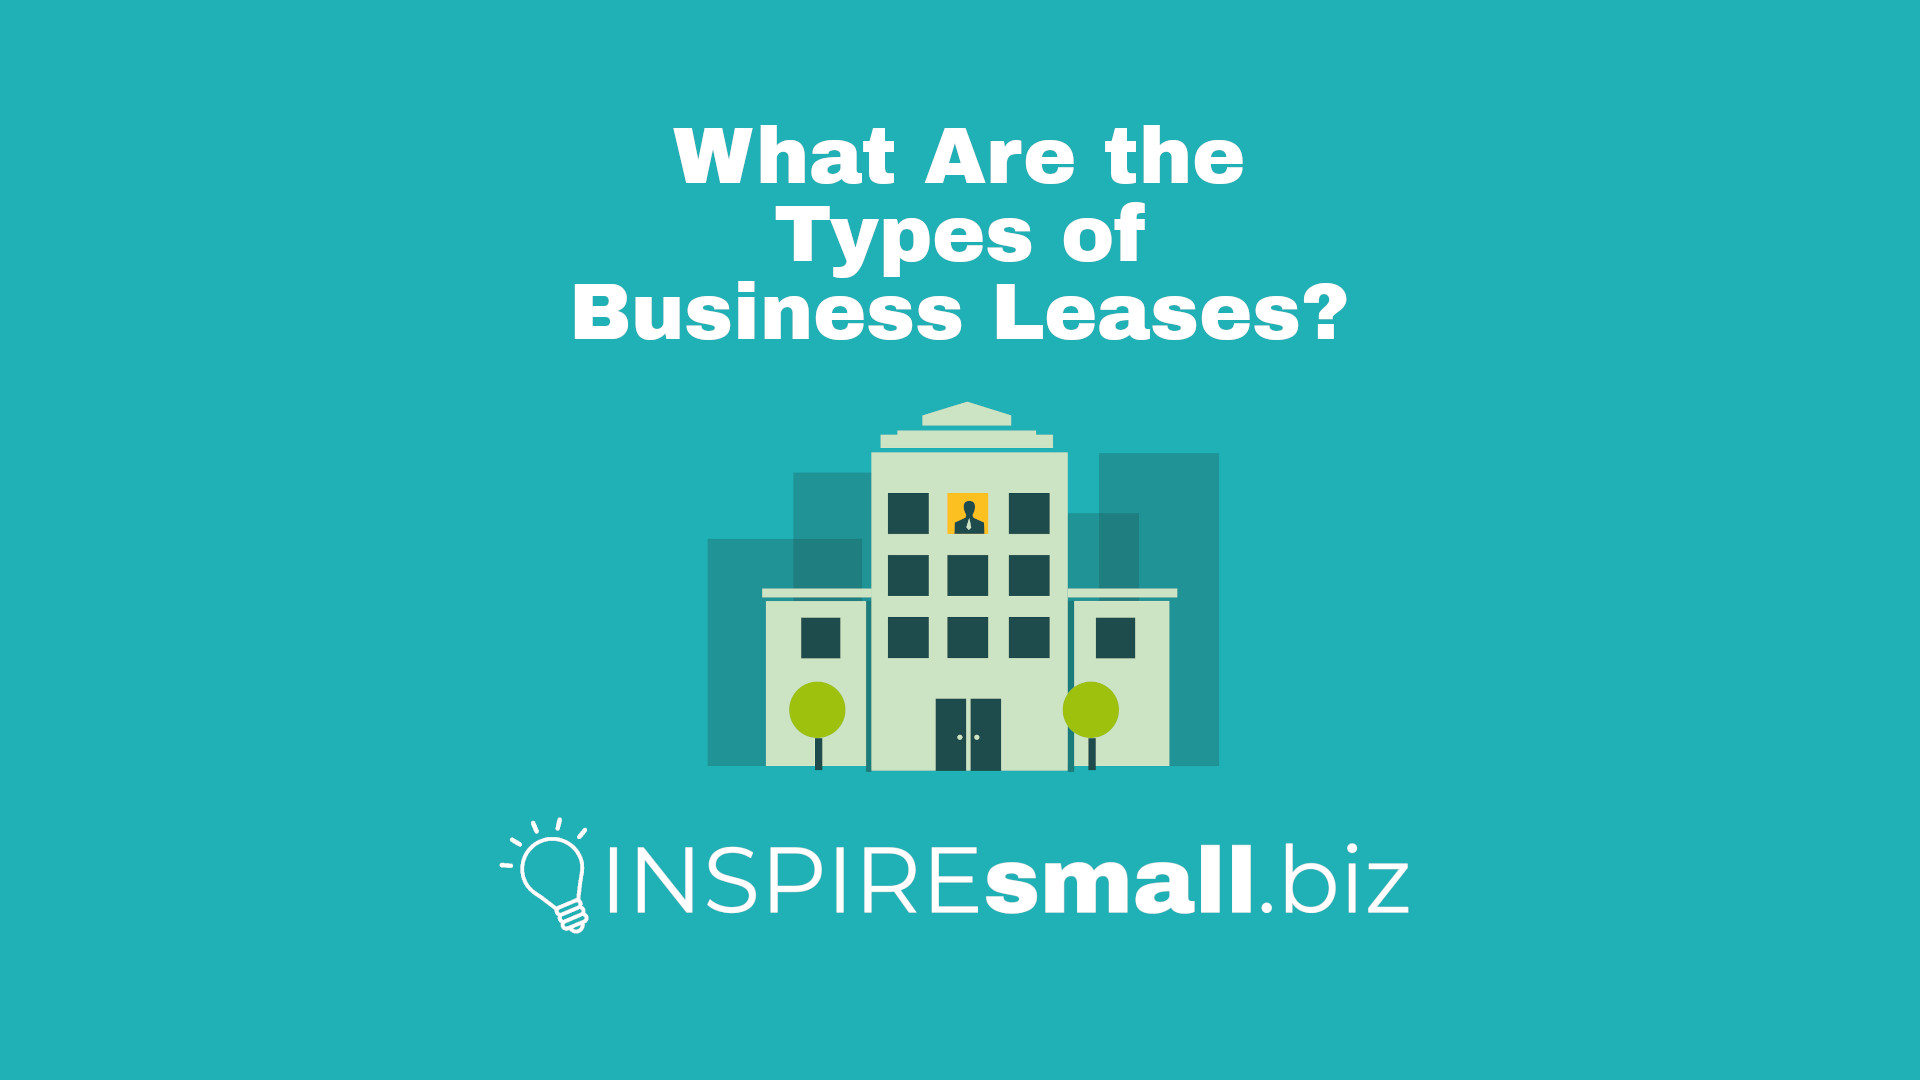 What Are the Types of Business Leases?